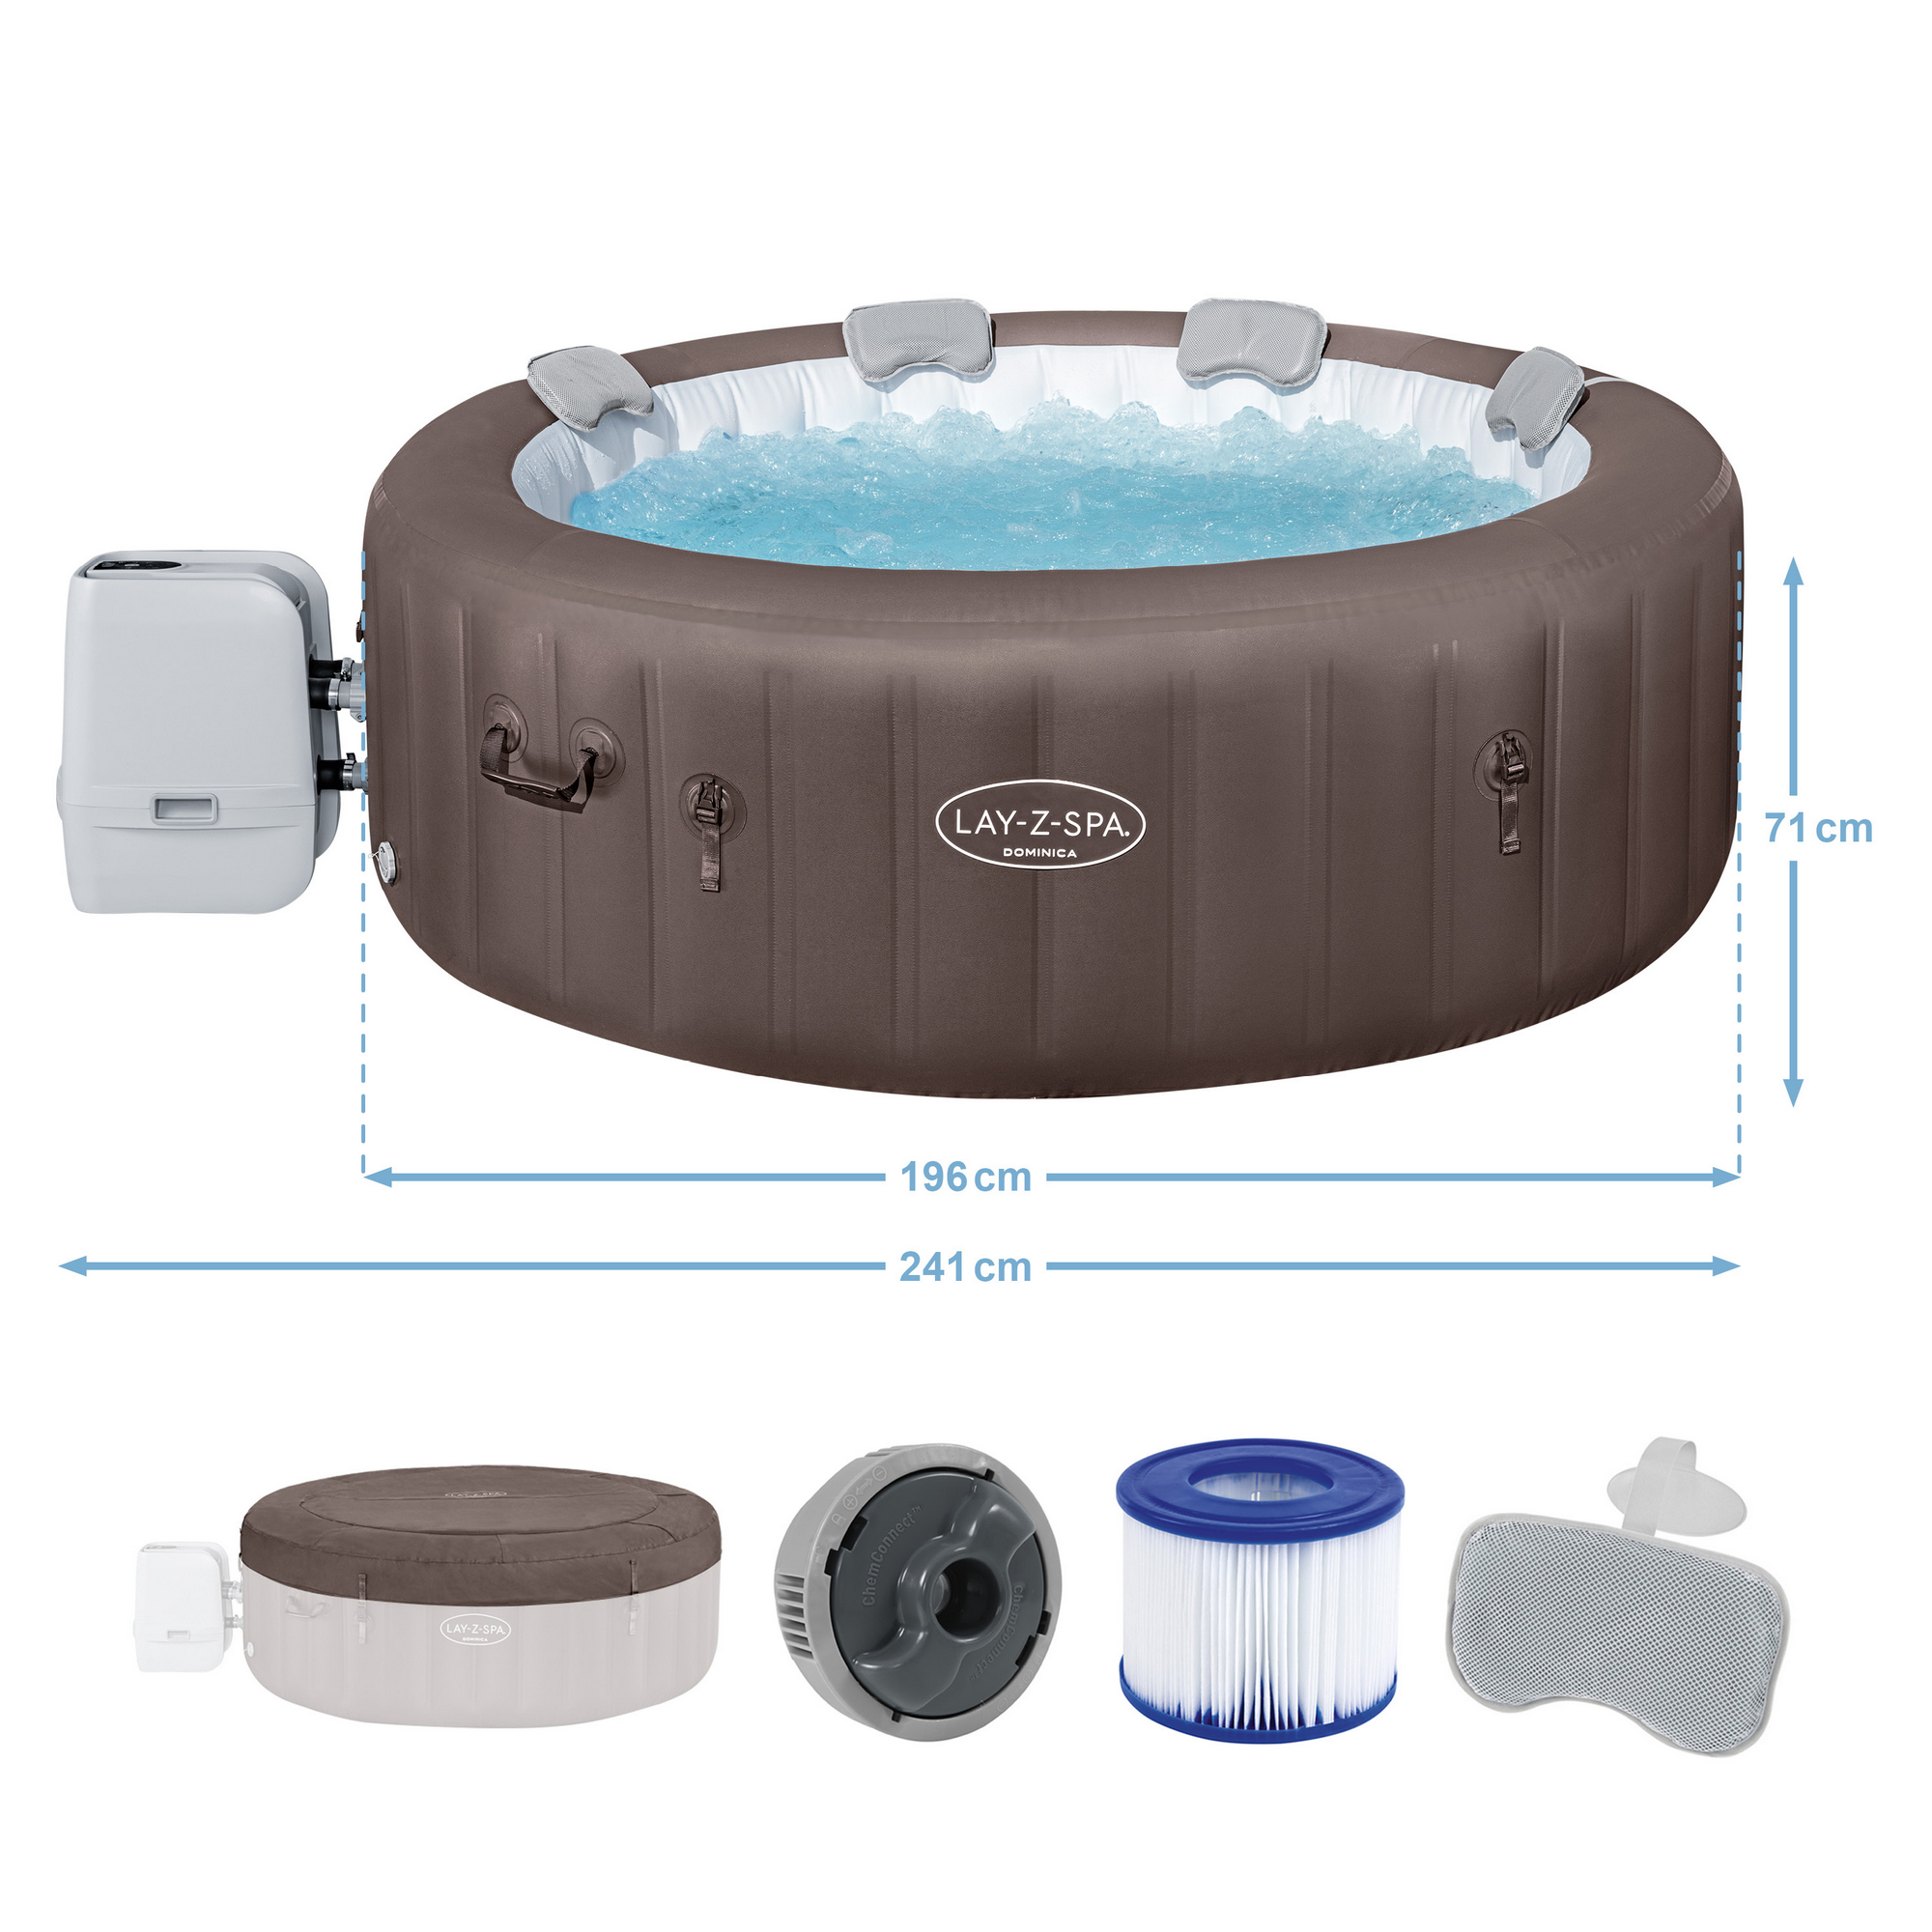 Whirlpool 'LAY-Z-SPA® Dominica HydroJet™' braun/weiß Ø 196 x 71 cm + product picture